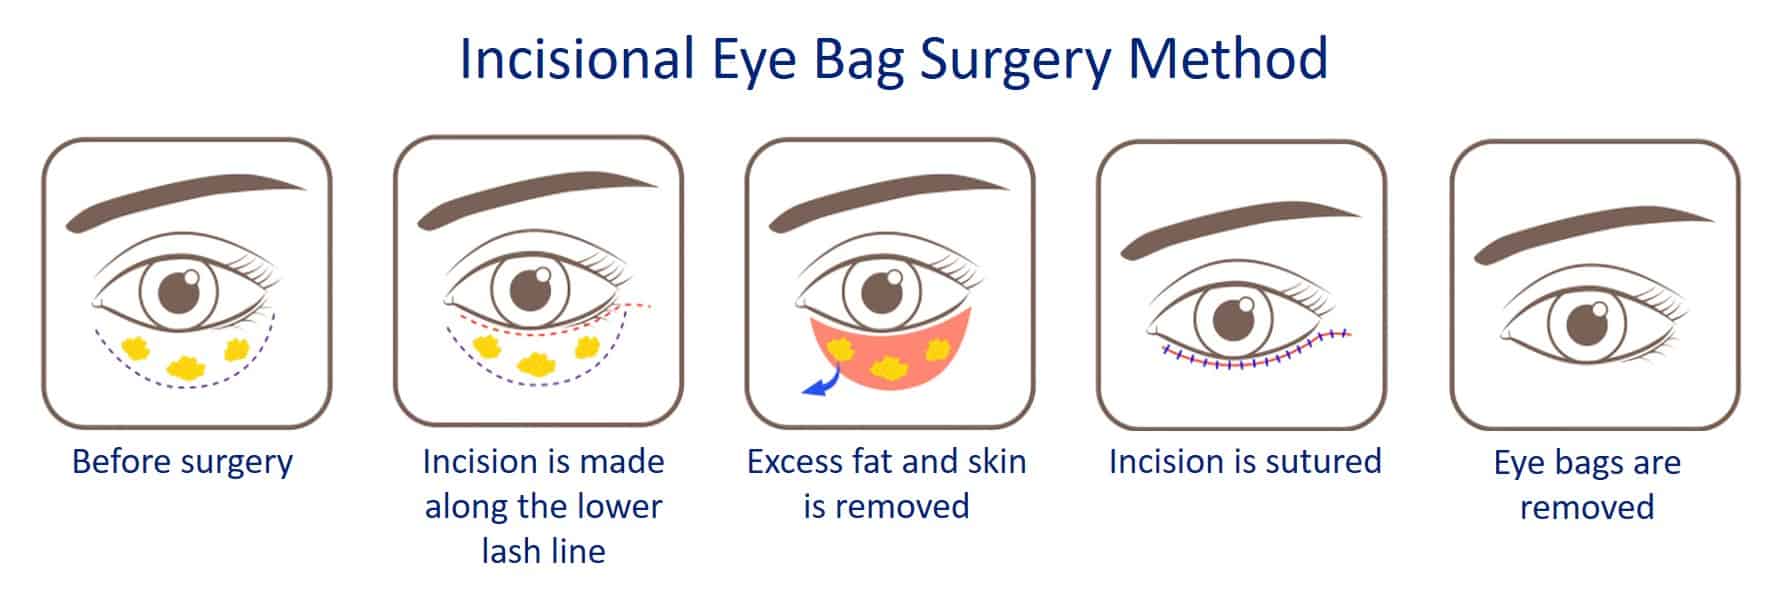 incisional eye bag removal surgery process